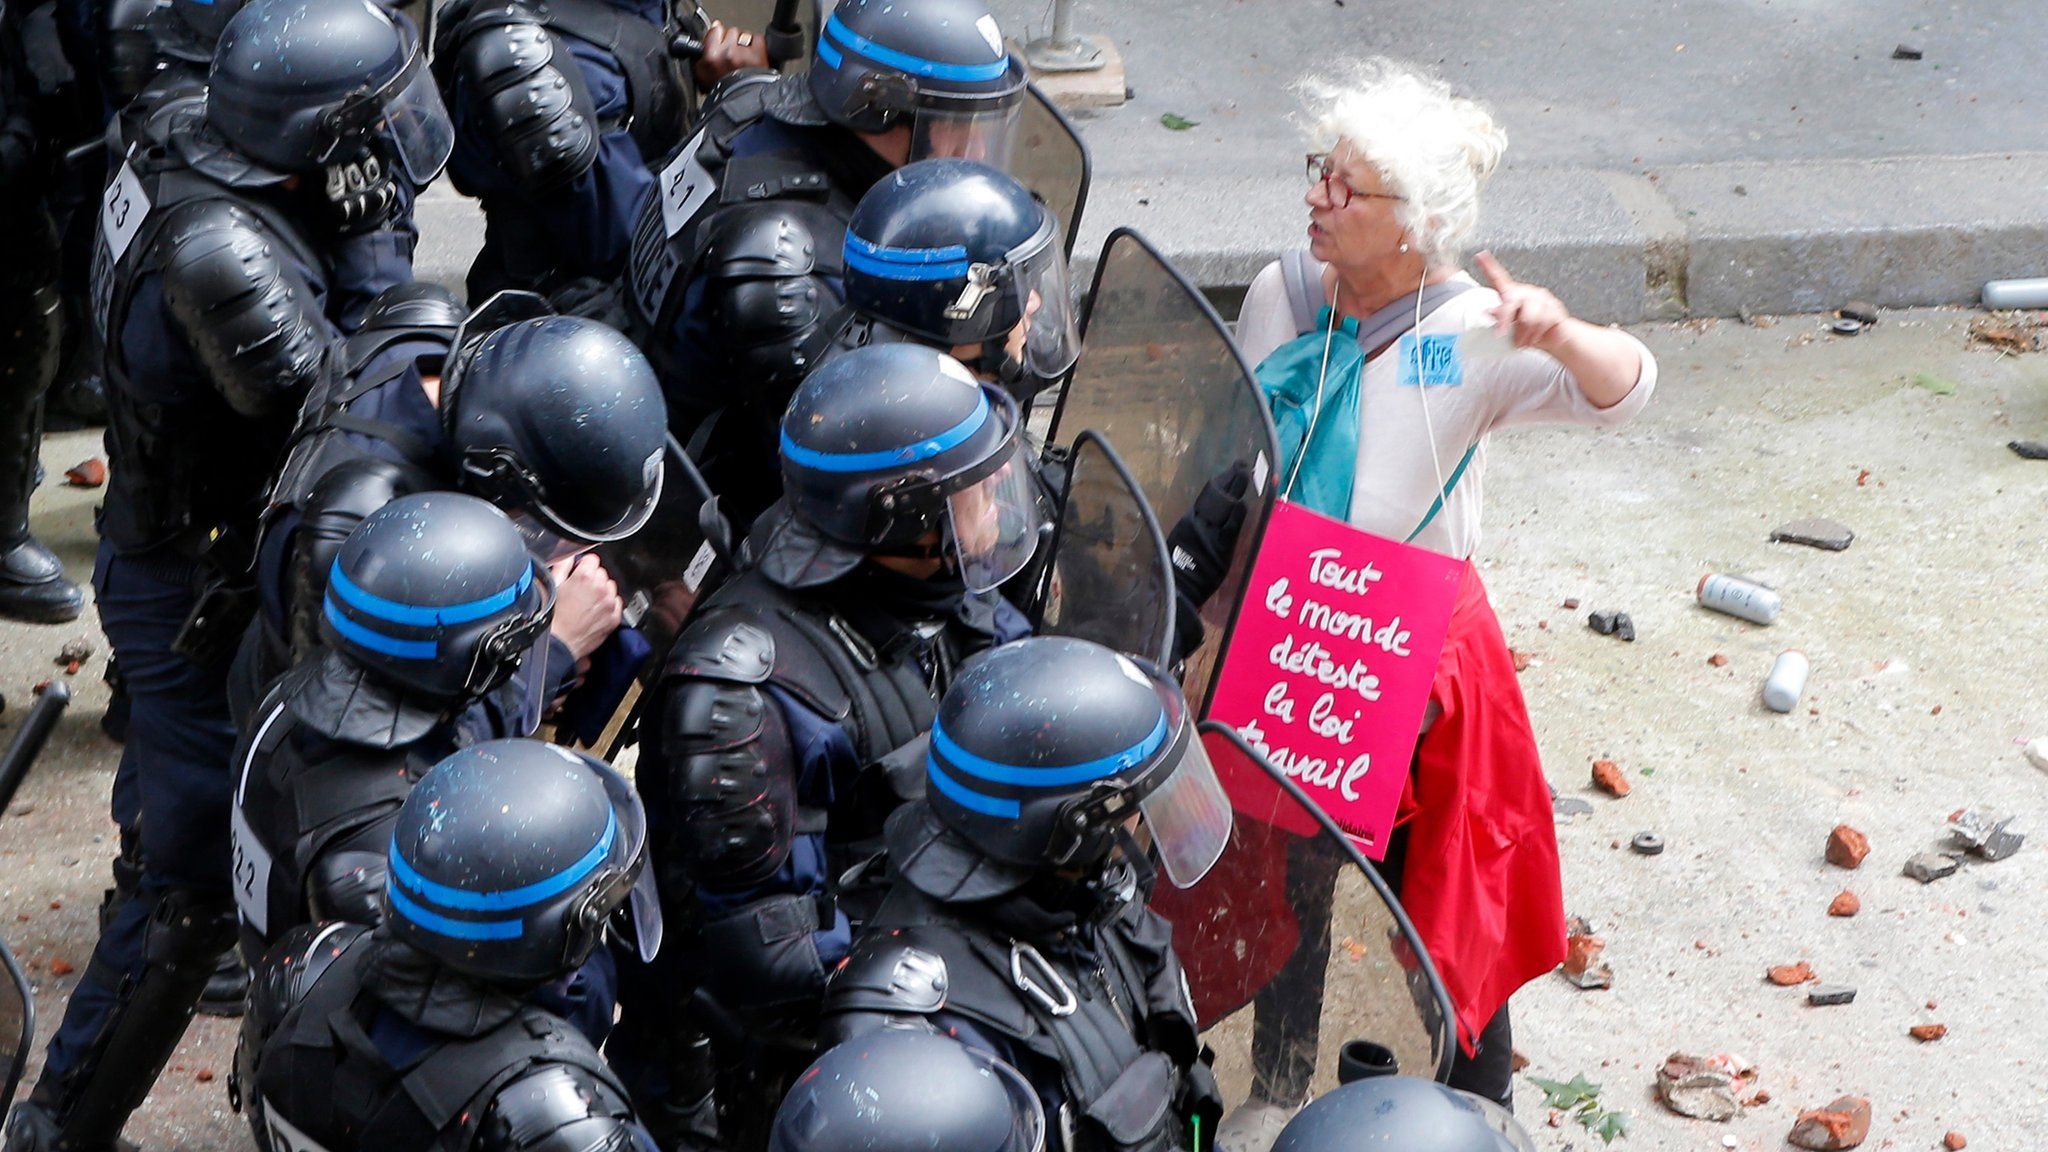 A woman, with a poster reading "We all hate the Labor Law", argues with riot police officers during a demonstration in Paris Tuesday, 14 June 2016